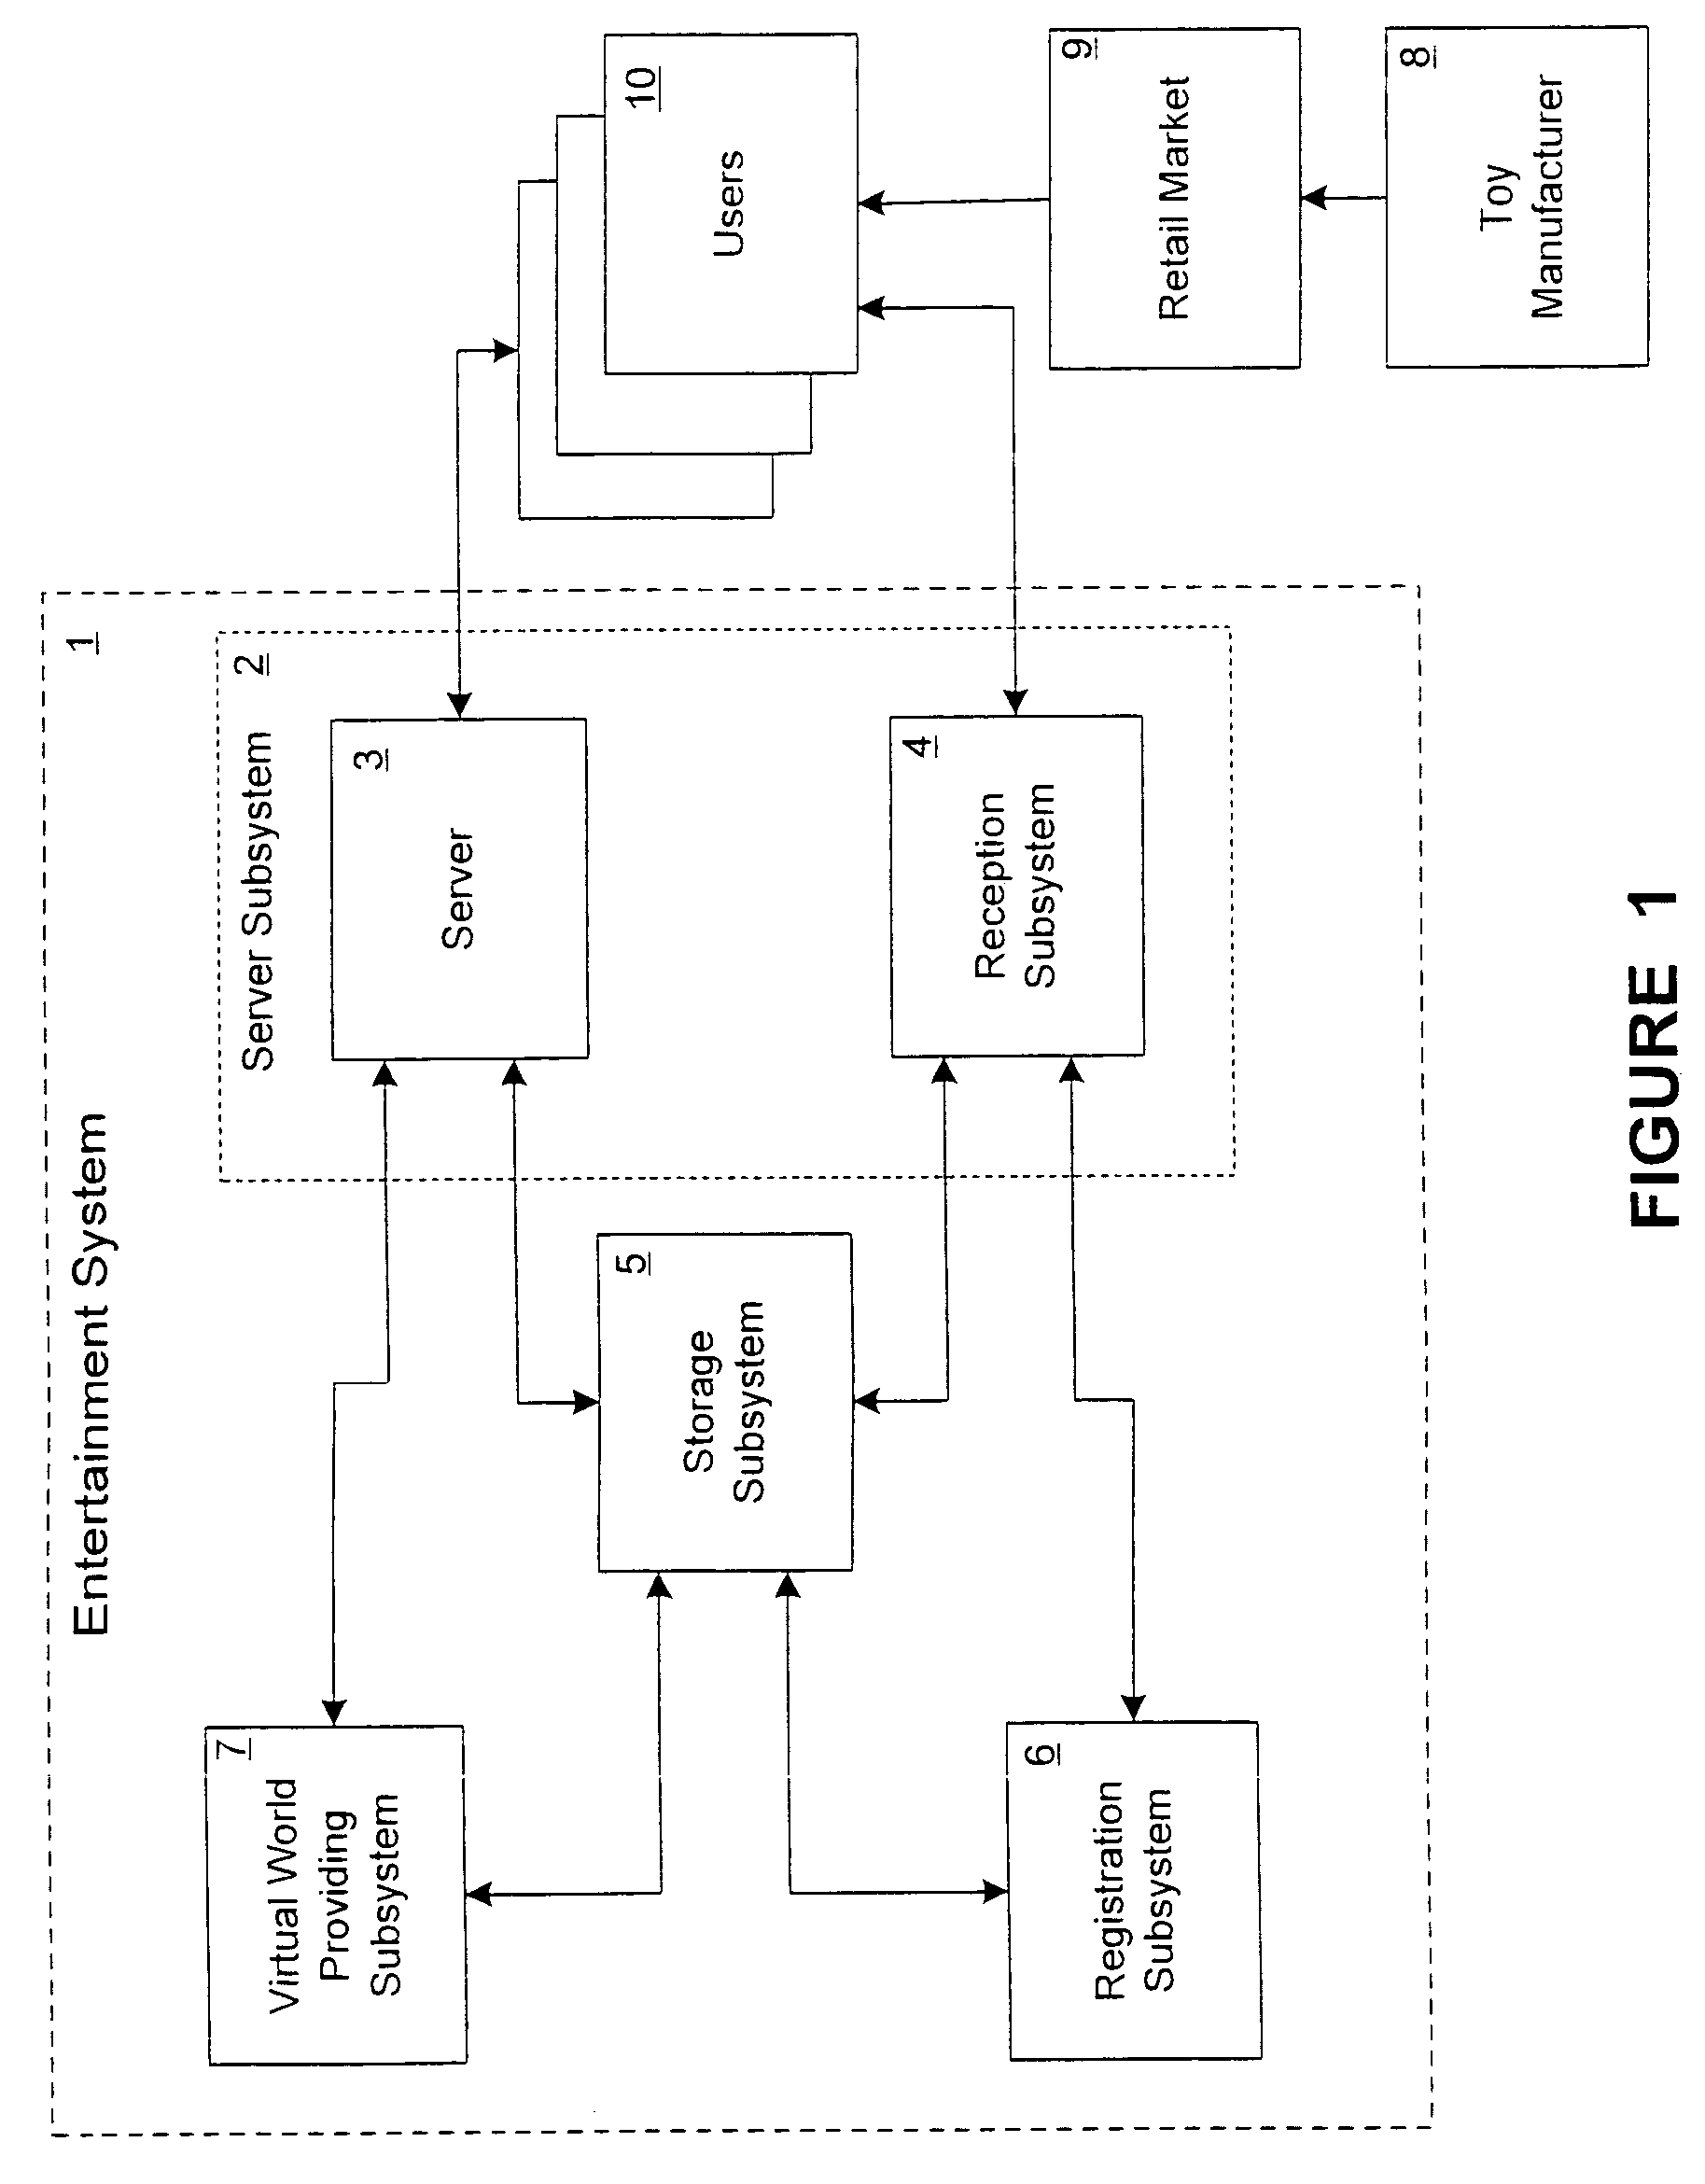 System and method for toy adoption and marketing